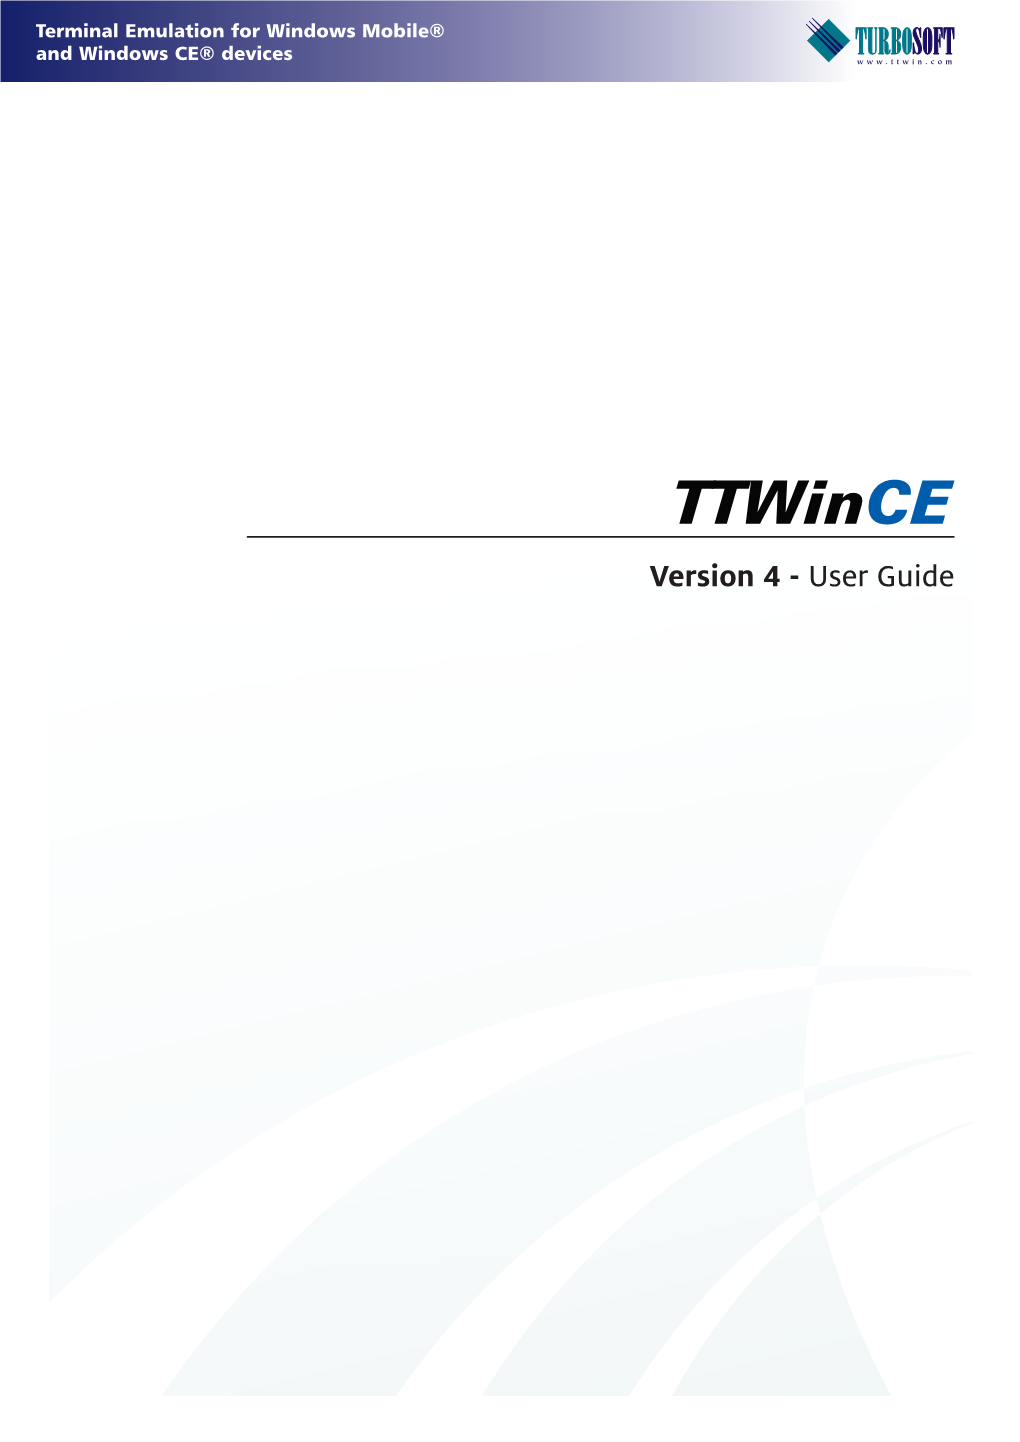 Ttwince User Guide Is a Comprehensive Document Designed to Help You Work Easily and Efficiently with Turbosoft's Ttwince Terminal Emulation Package